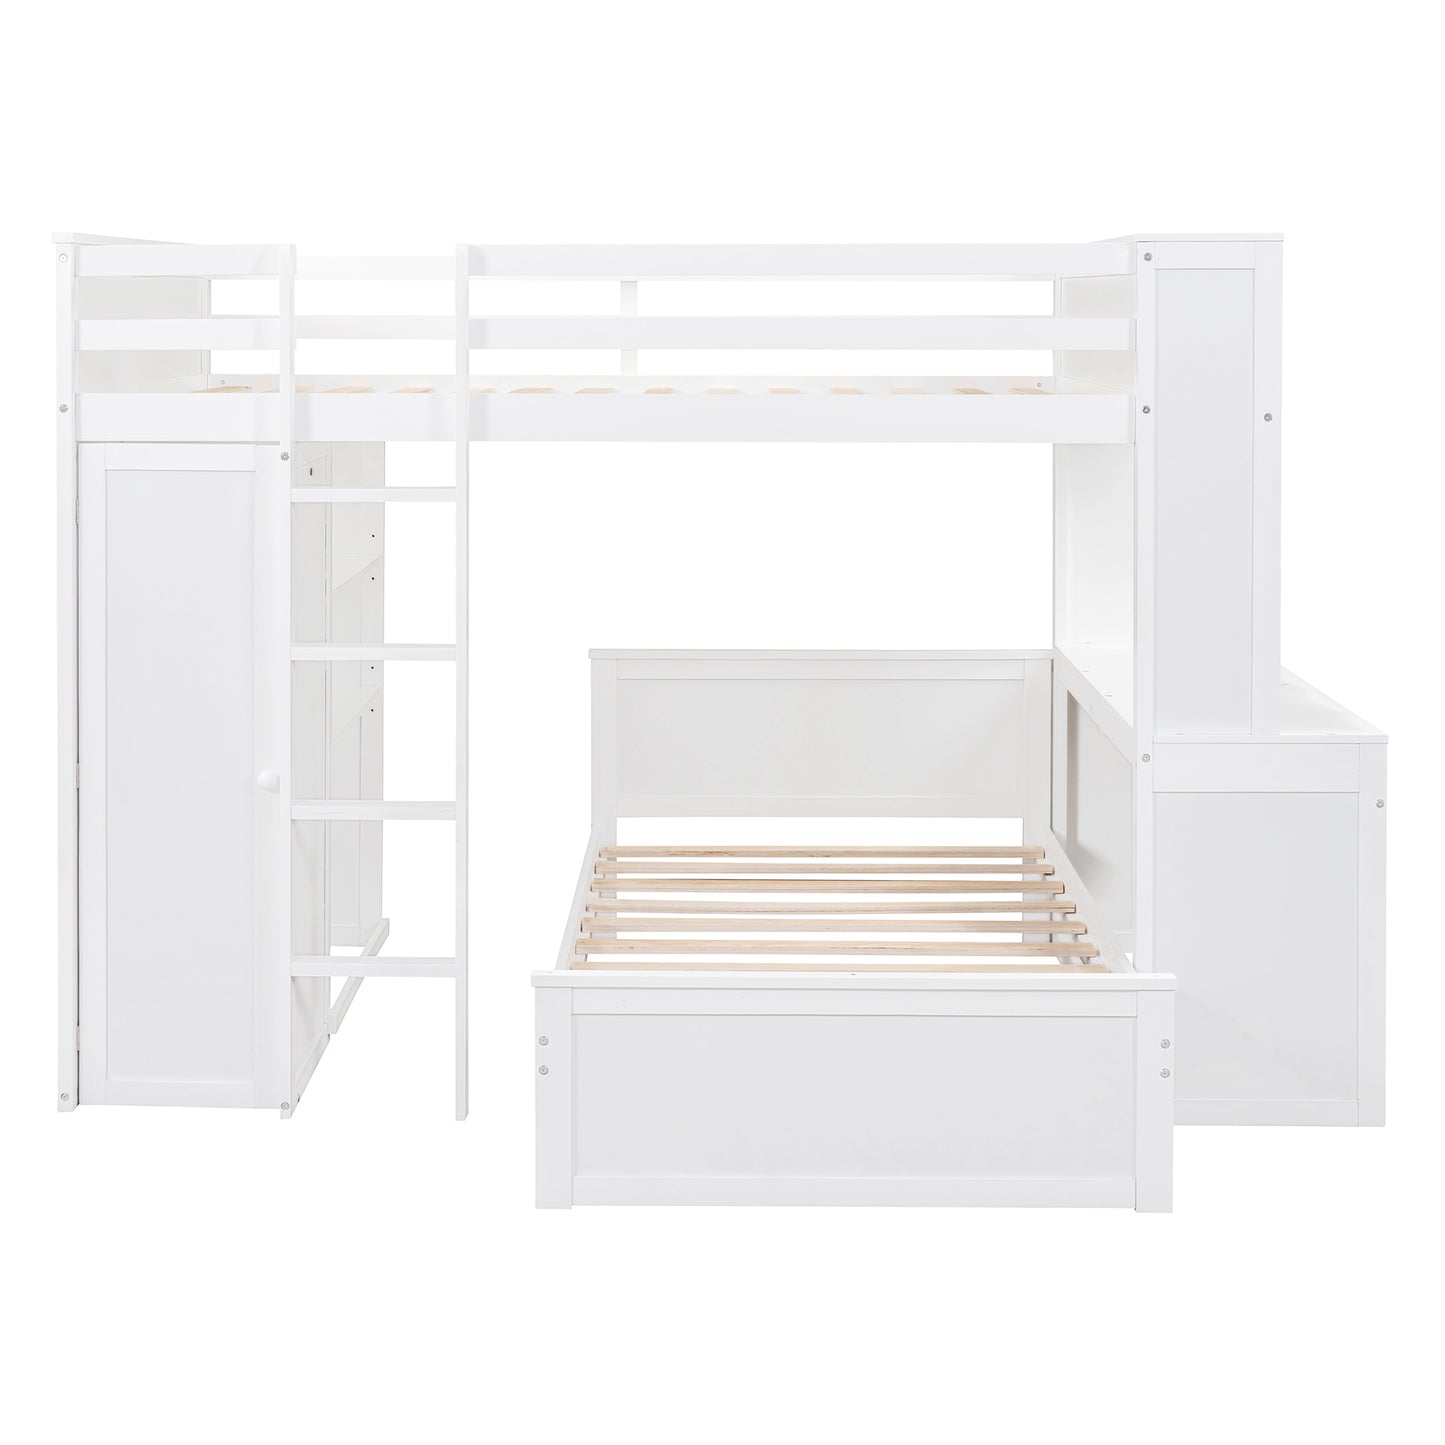 Full size Loft Bed with a twin size Stand-alone bed, Shelves,Desk,and Wardrobe-White